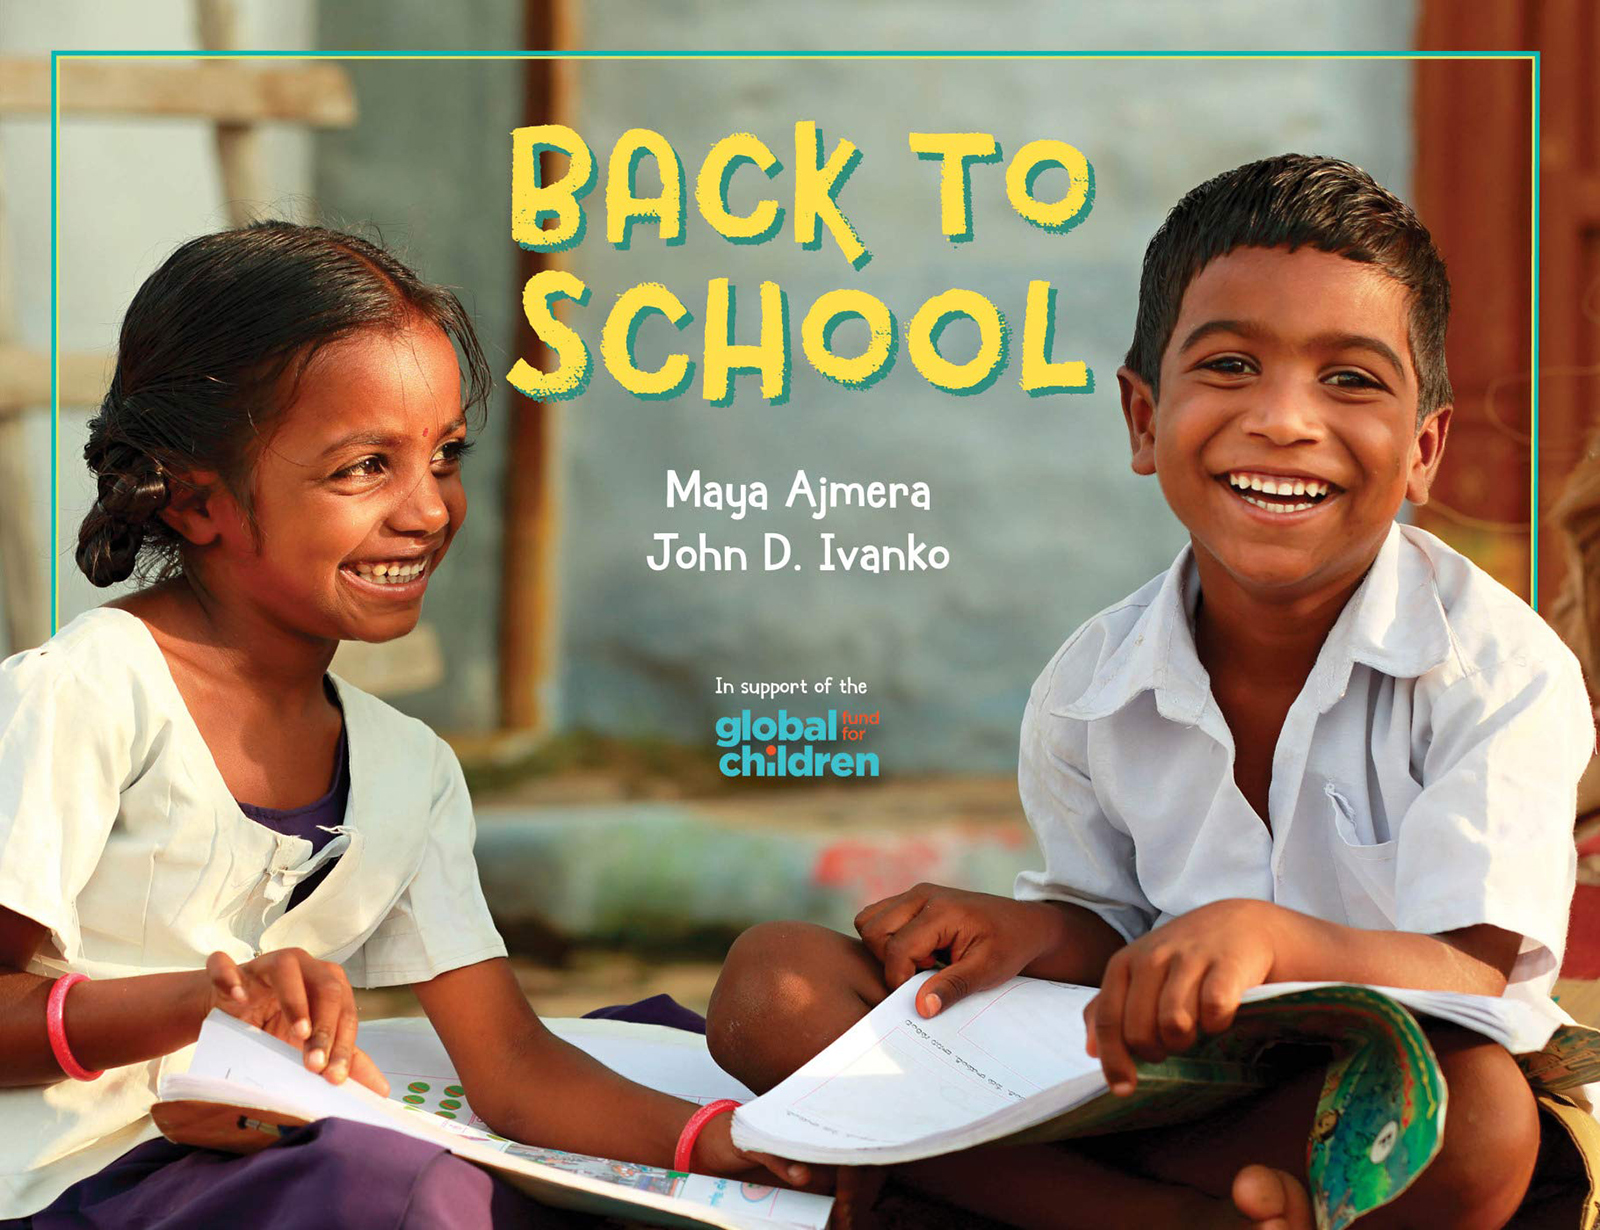 Cover of Back to School